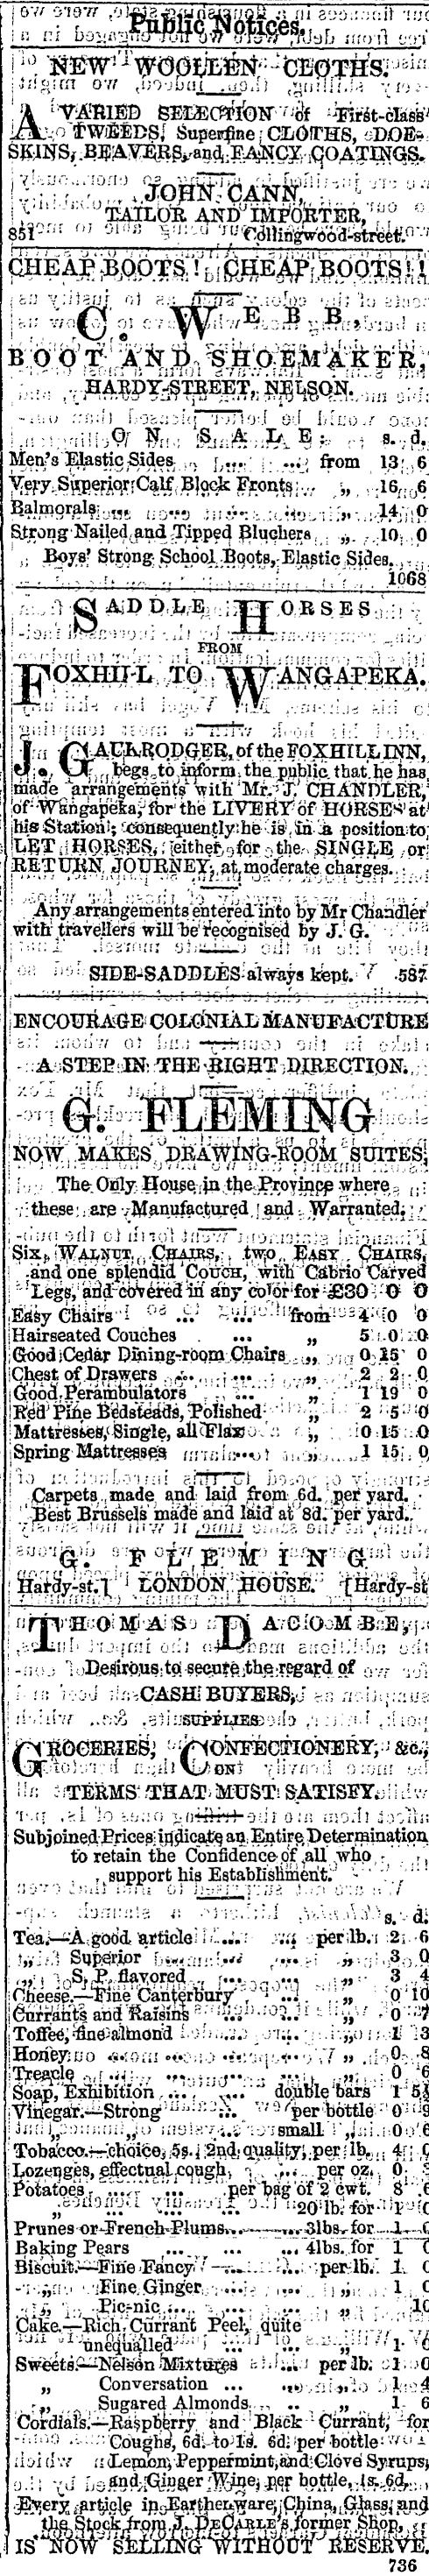 Papers Past Newspapers Nelson Evening Mail 1 July 1870 Page 1 Advertisements Column 3